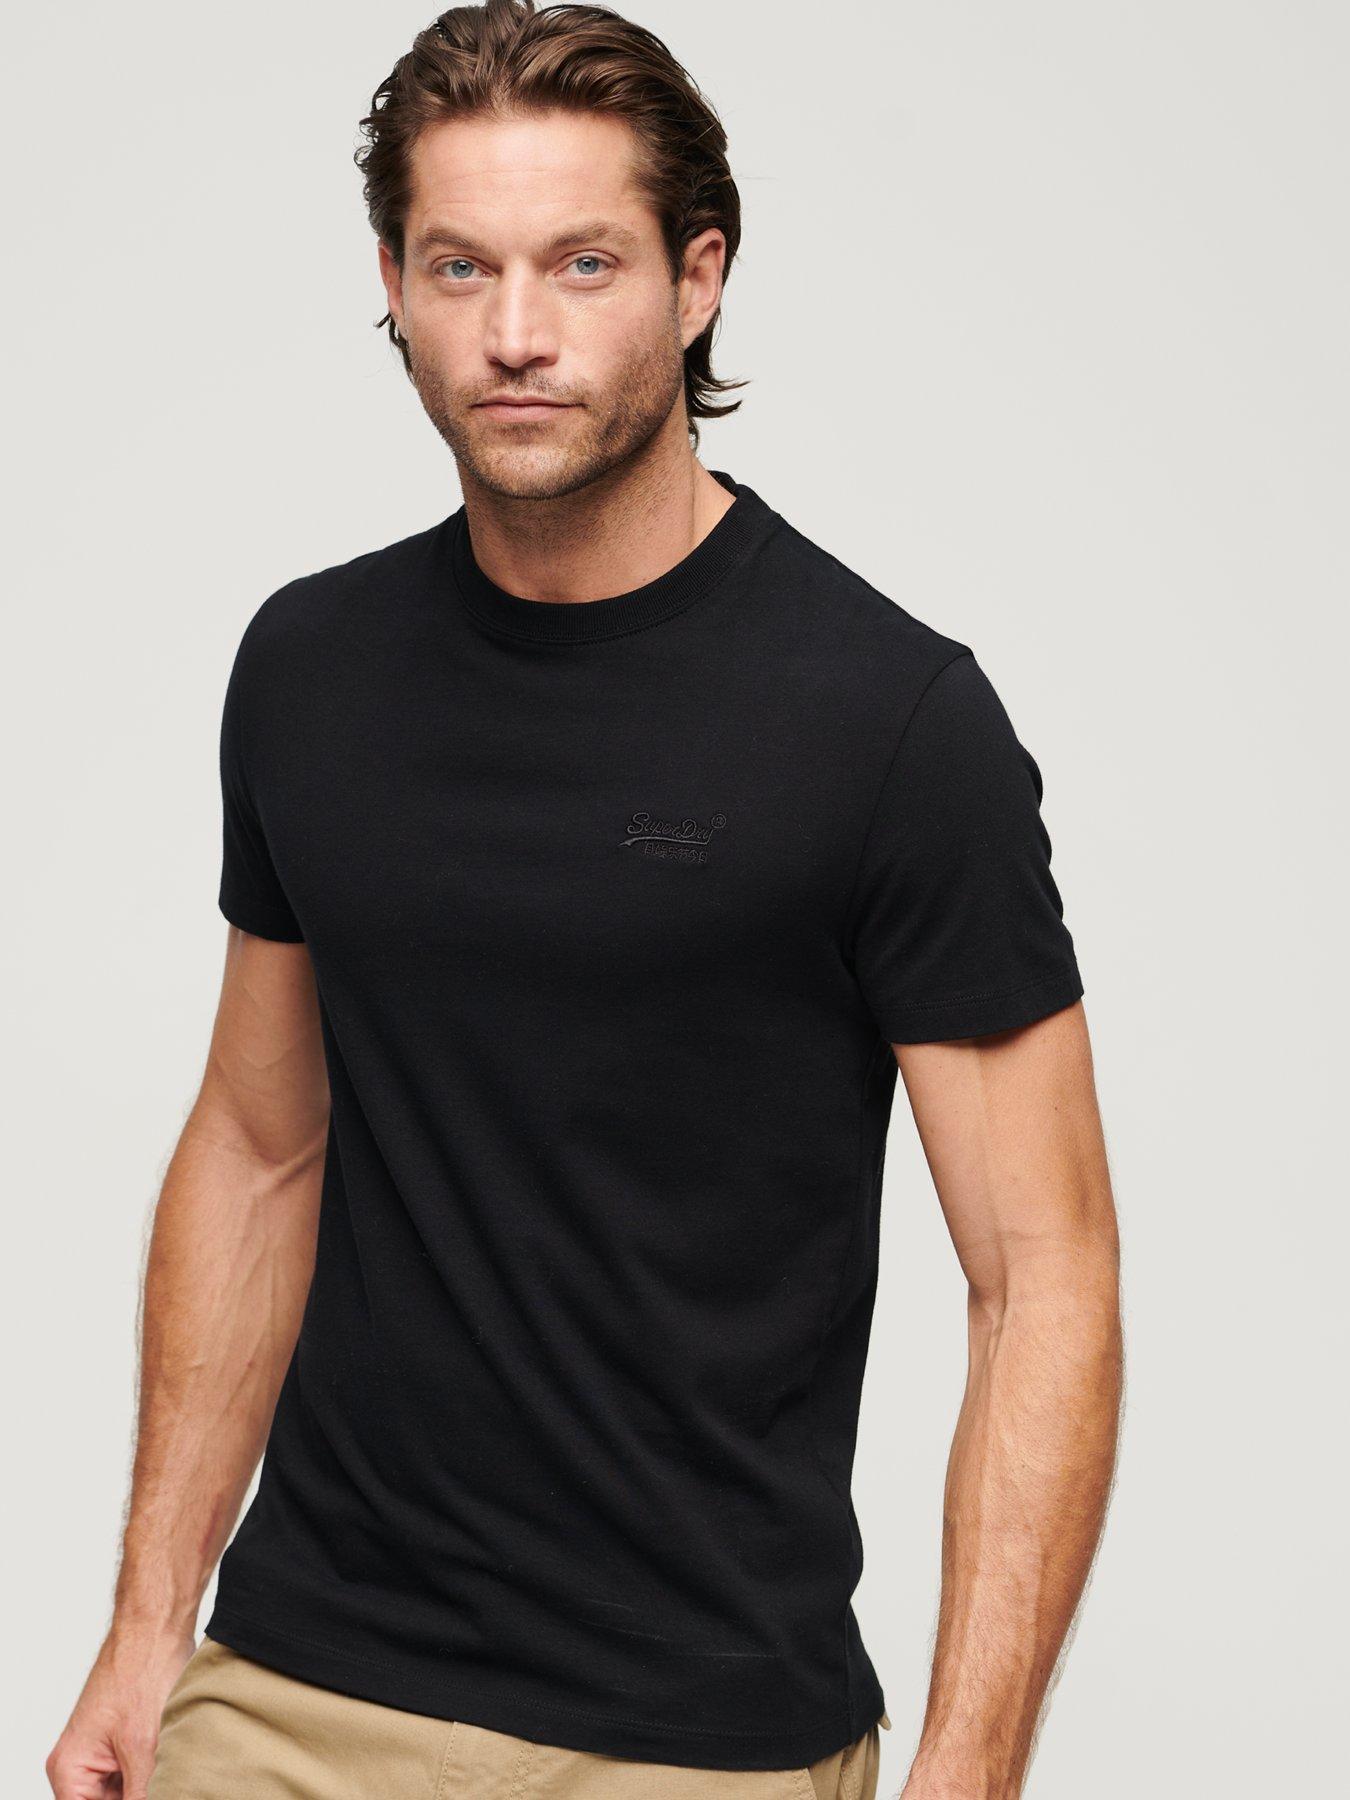 Superdry T-Shirts Men's Superdry | Very.co.uk